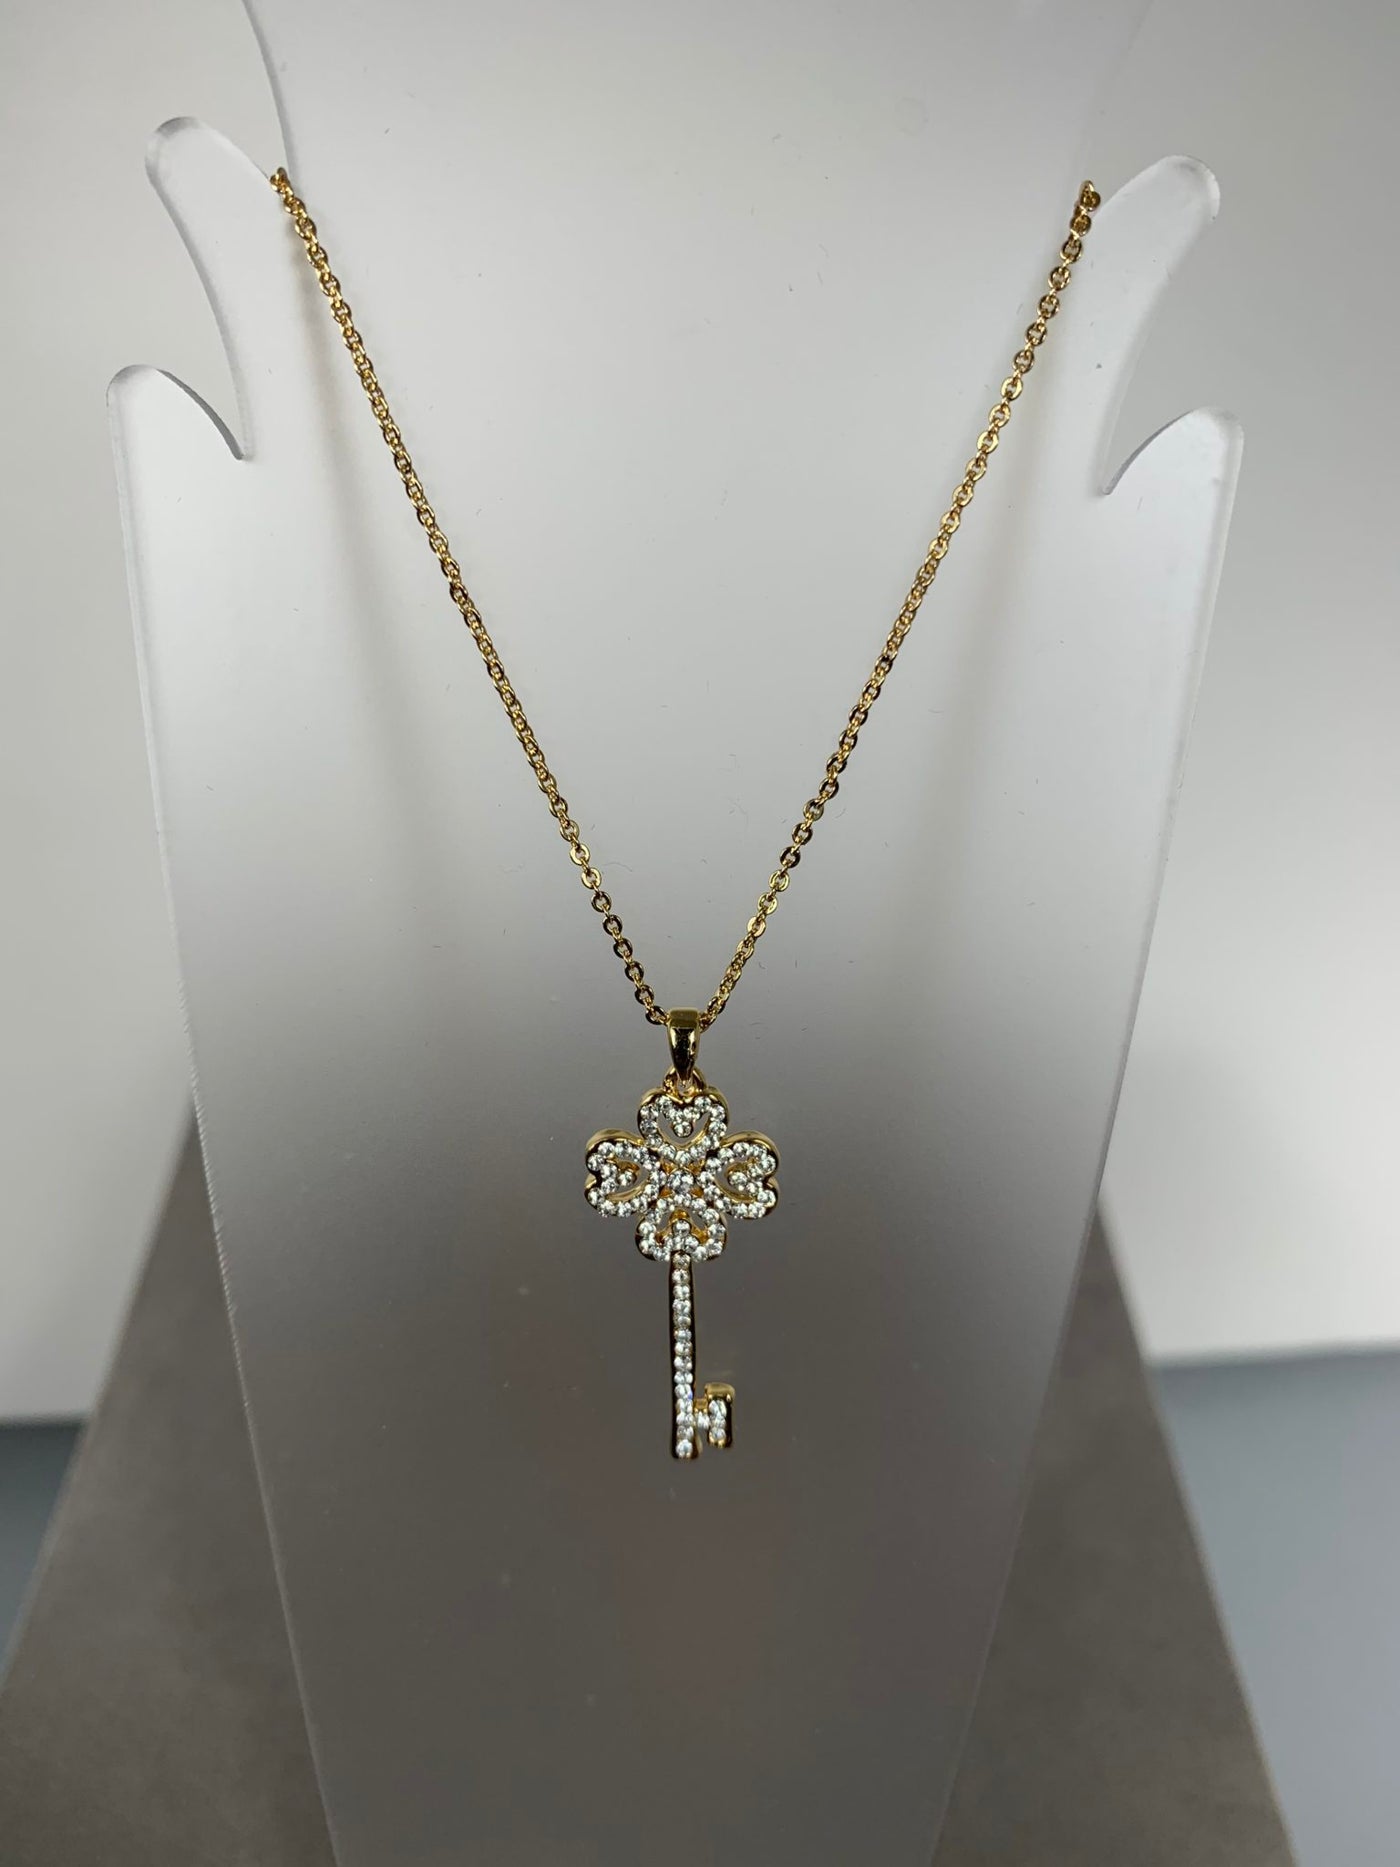 Yellow Gold Tone Crystal Key Pendant Necklace